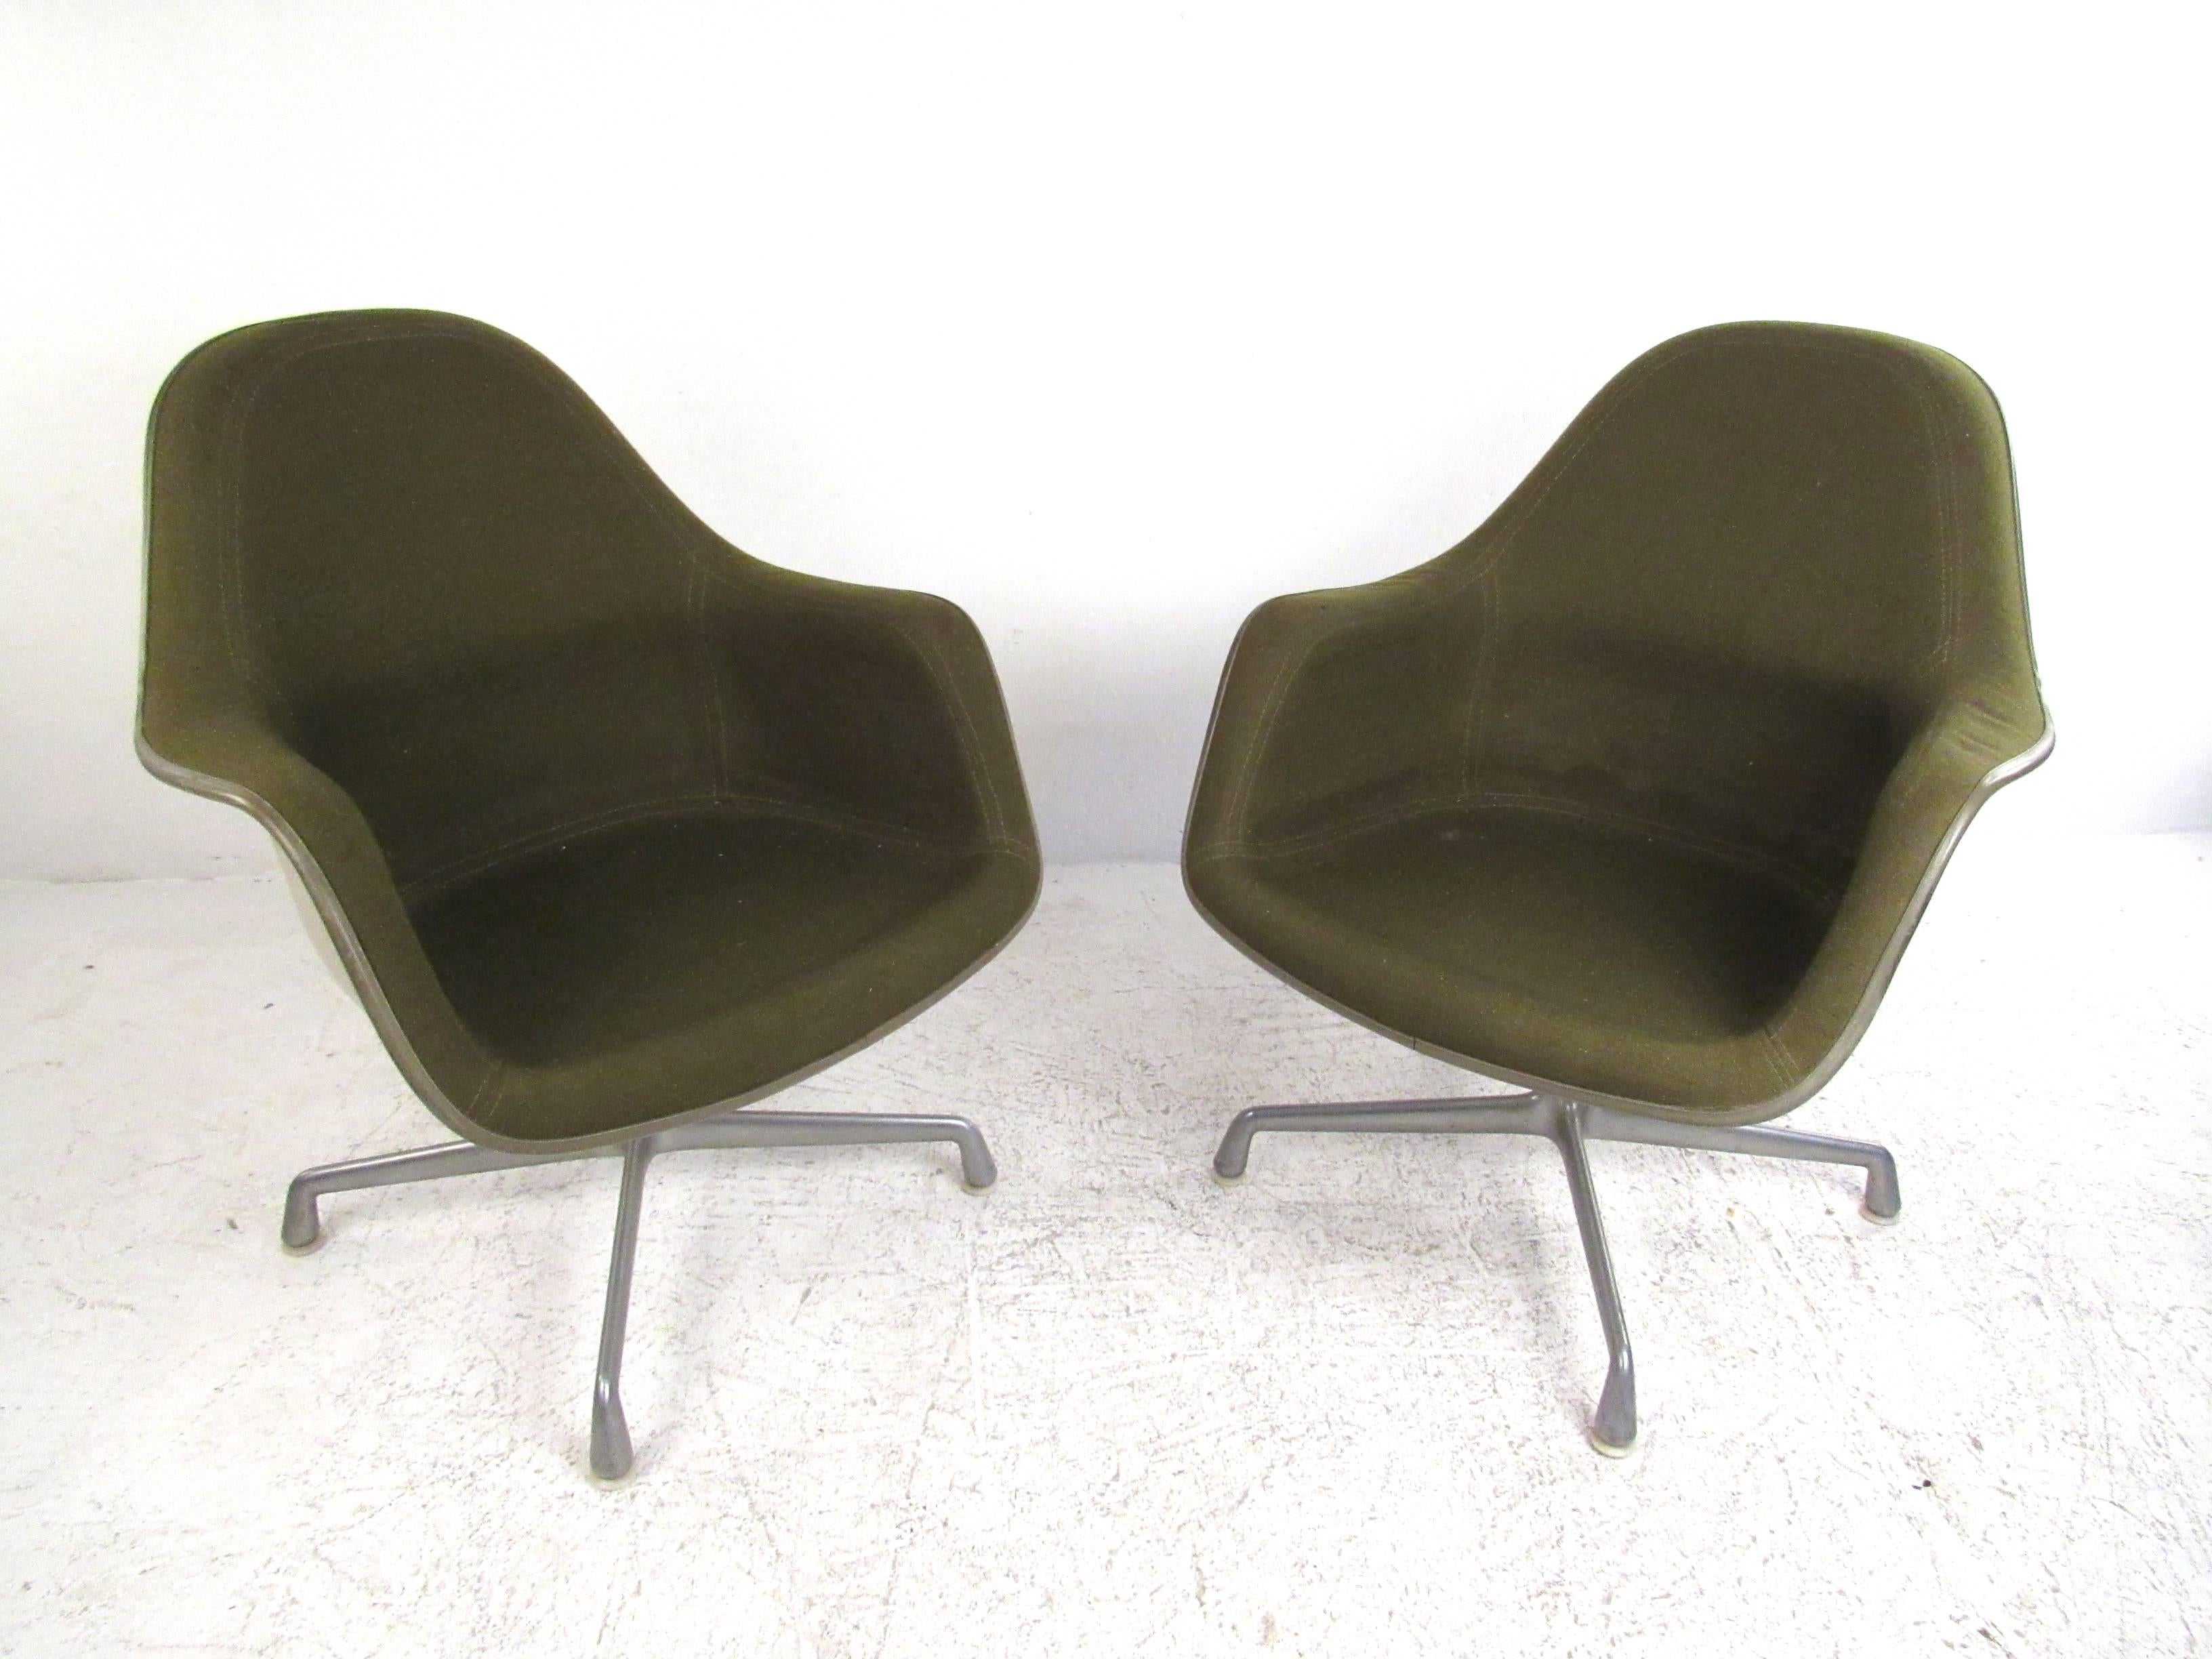 This unique pair of Charles Eames vintage swivel chairs feature upholstered fiberglass seats set on sturdy aluminum swivel bases. Unique retro style makes this iconic pair of Herman Miller chairs a distinctive addition to any interior. Please